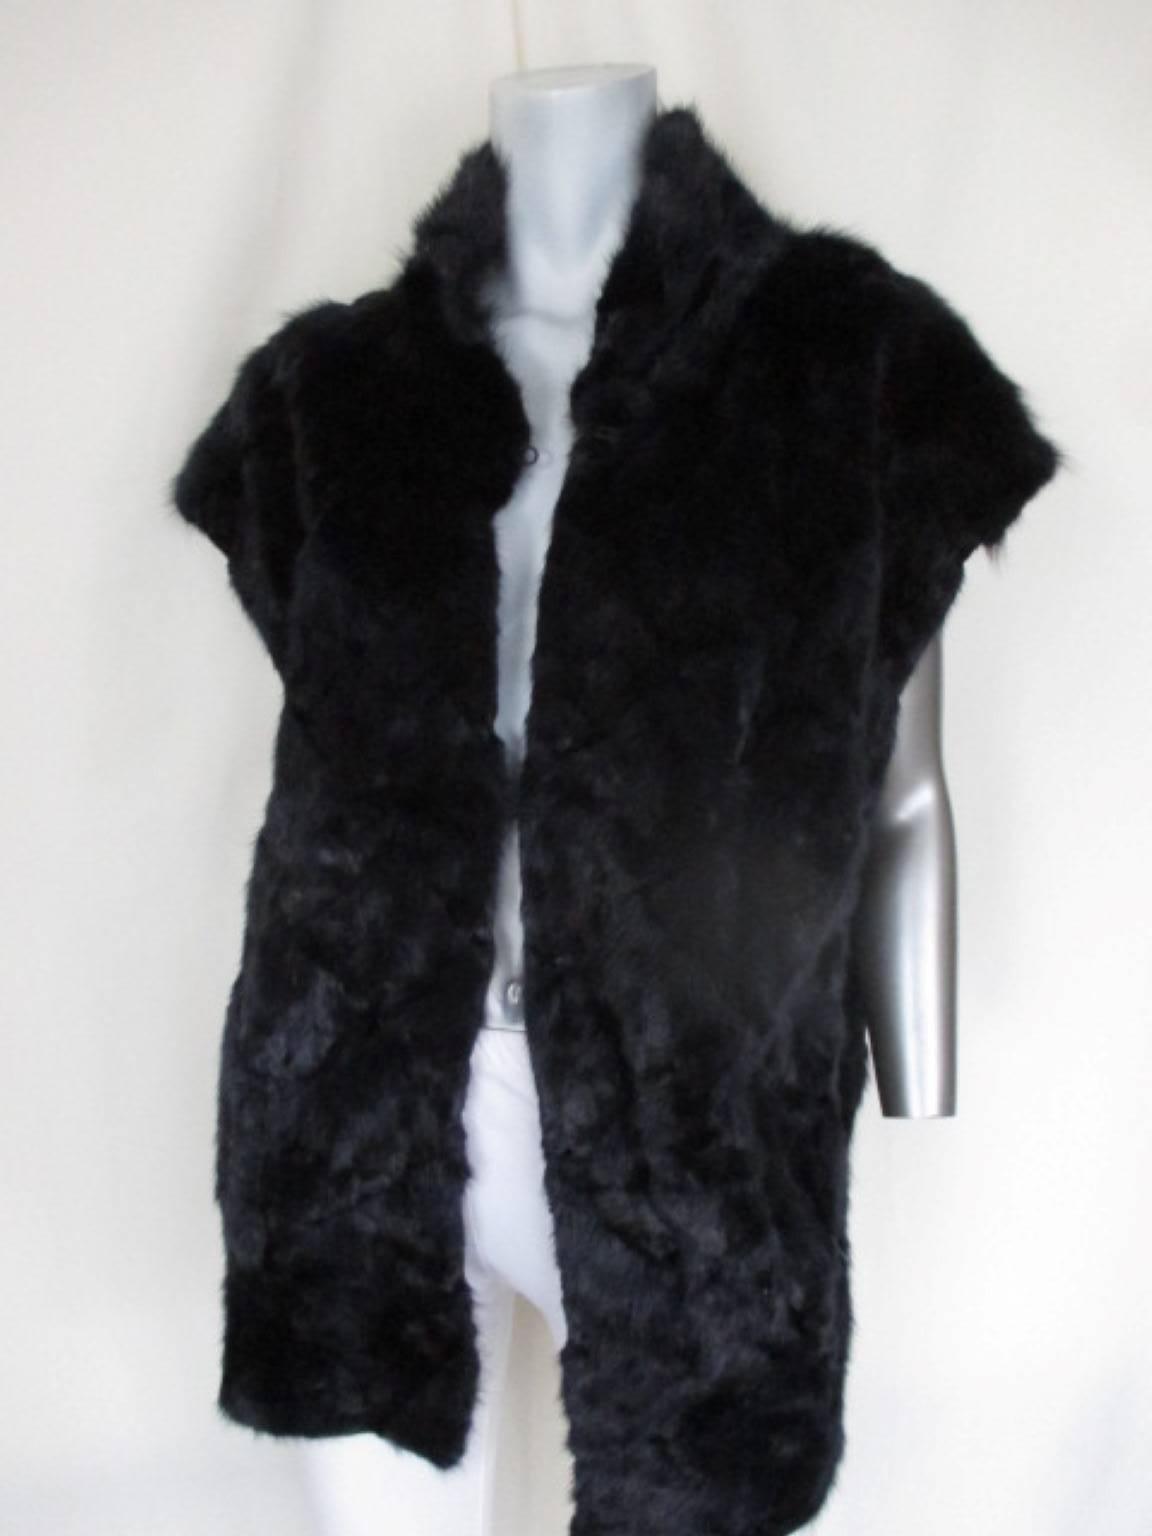 This vest is made of fabric print and dyed purple /blue mink fur 
Its reversible
It has 3 closing hooks, 2 leather pockets
In good vintage condition 
Size fits about medium /large